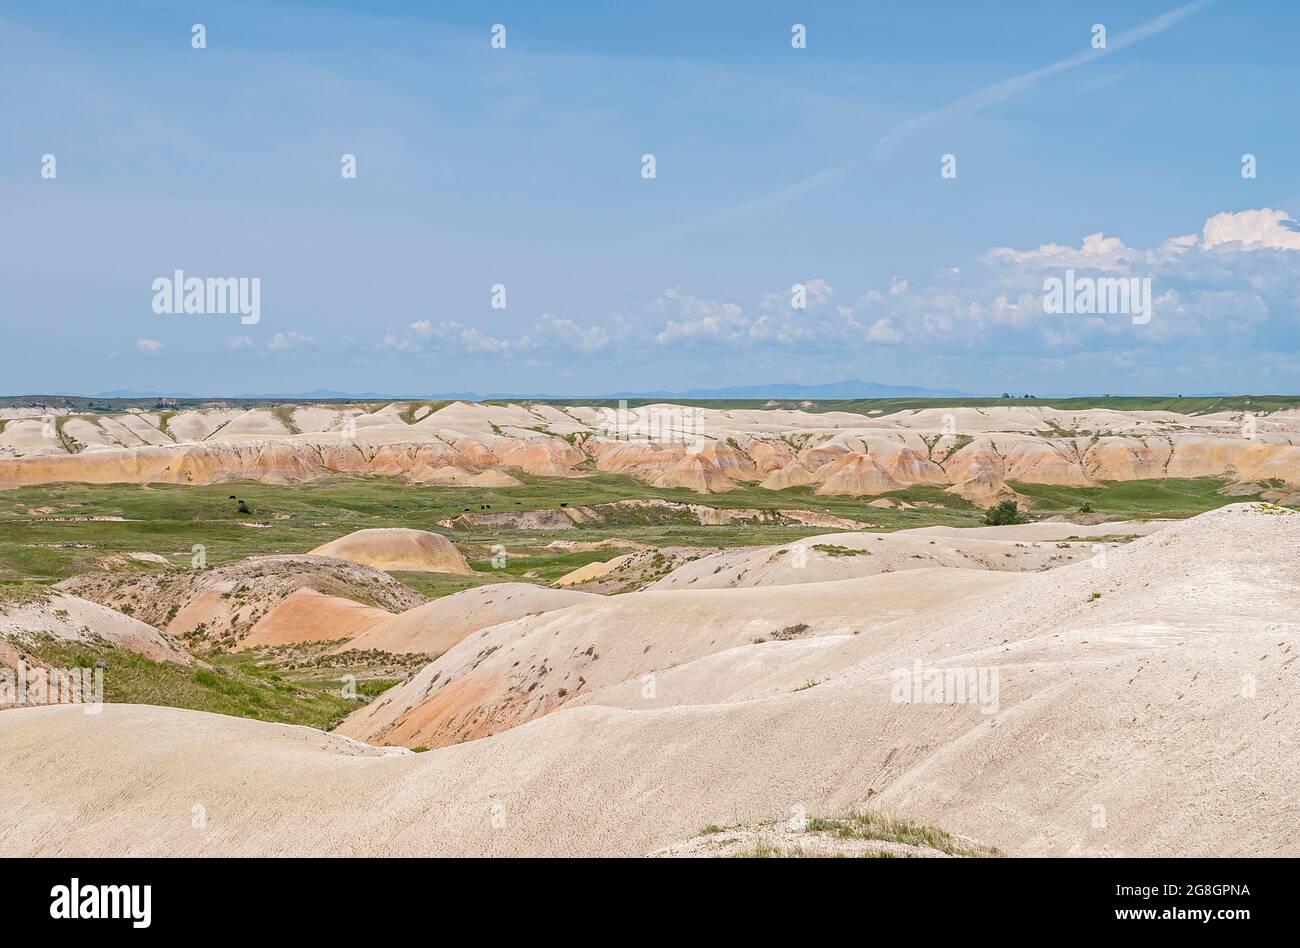 Badlands National Park, SD, USA - June 1, 2008: Wide landscape with only few green patches among beige and white geologic deposist galore under blue c Stock Photo